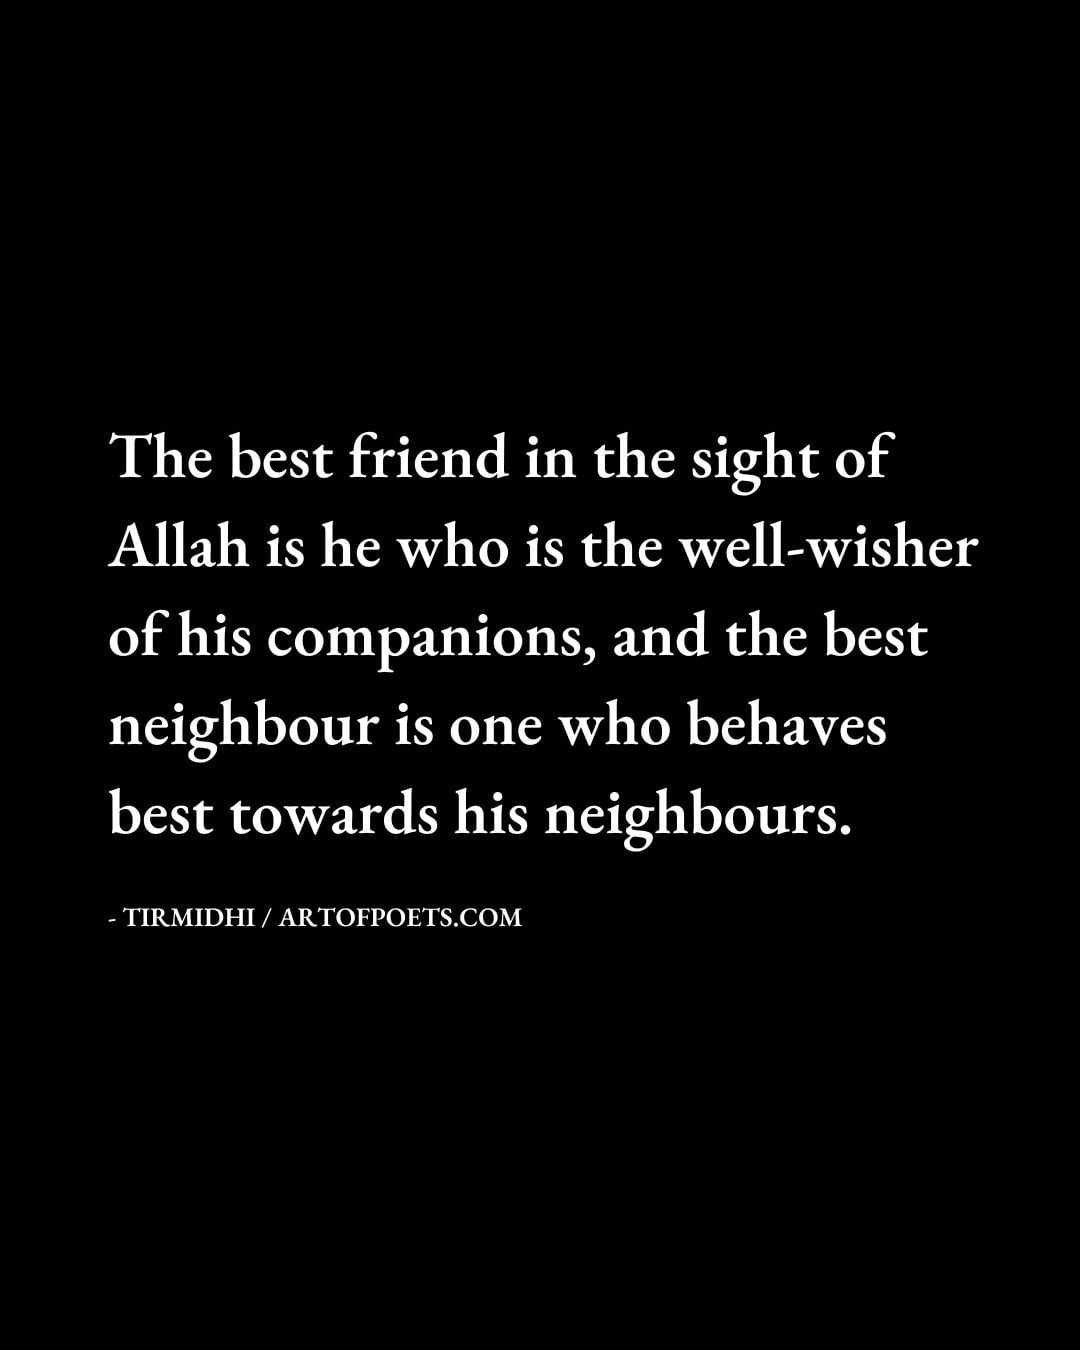 The best friend in the sight of Allah is he who is the well wisher of his companions